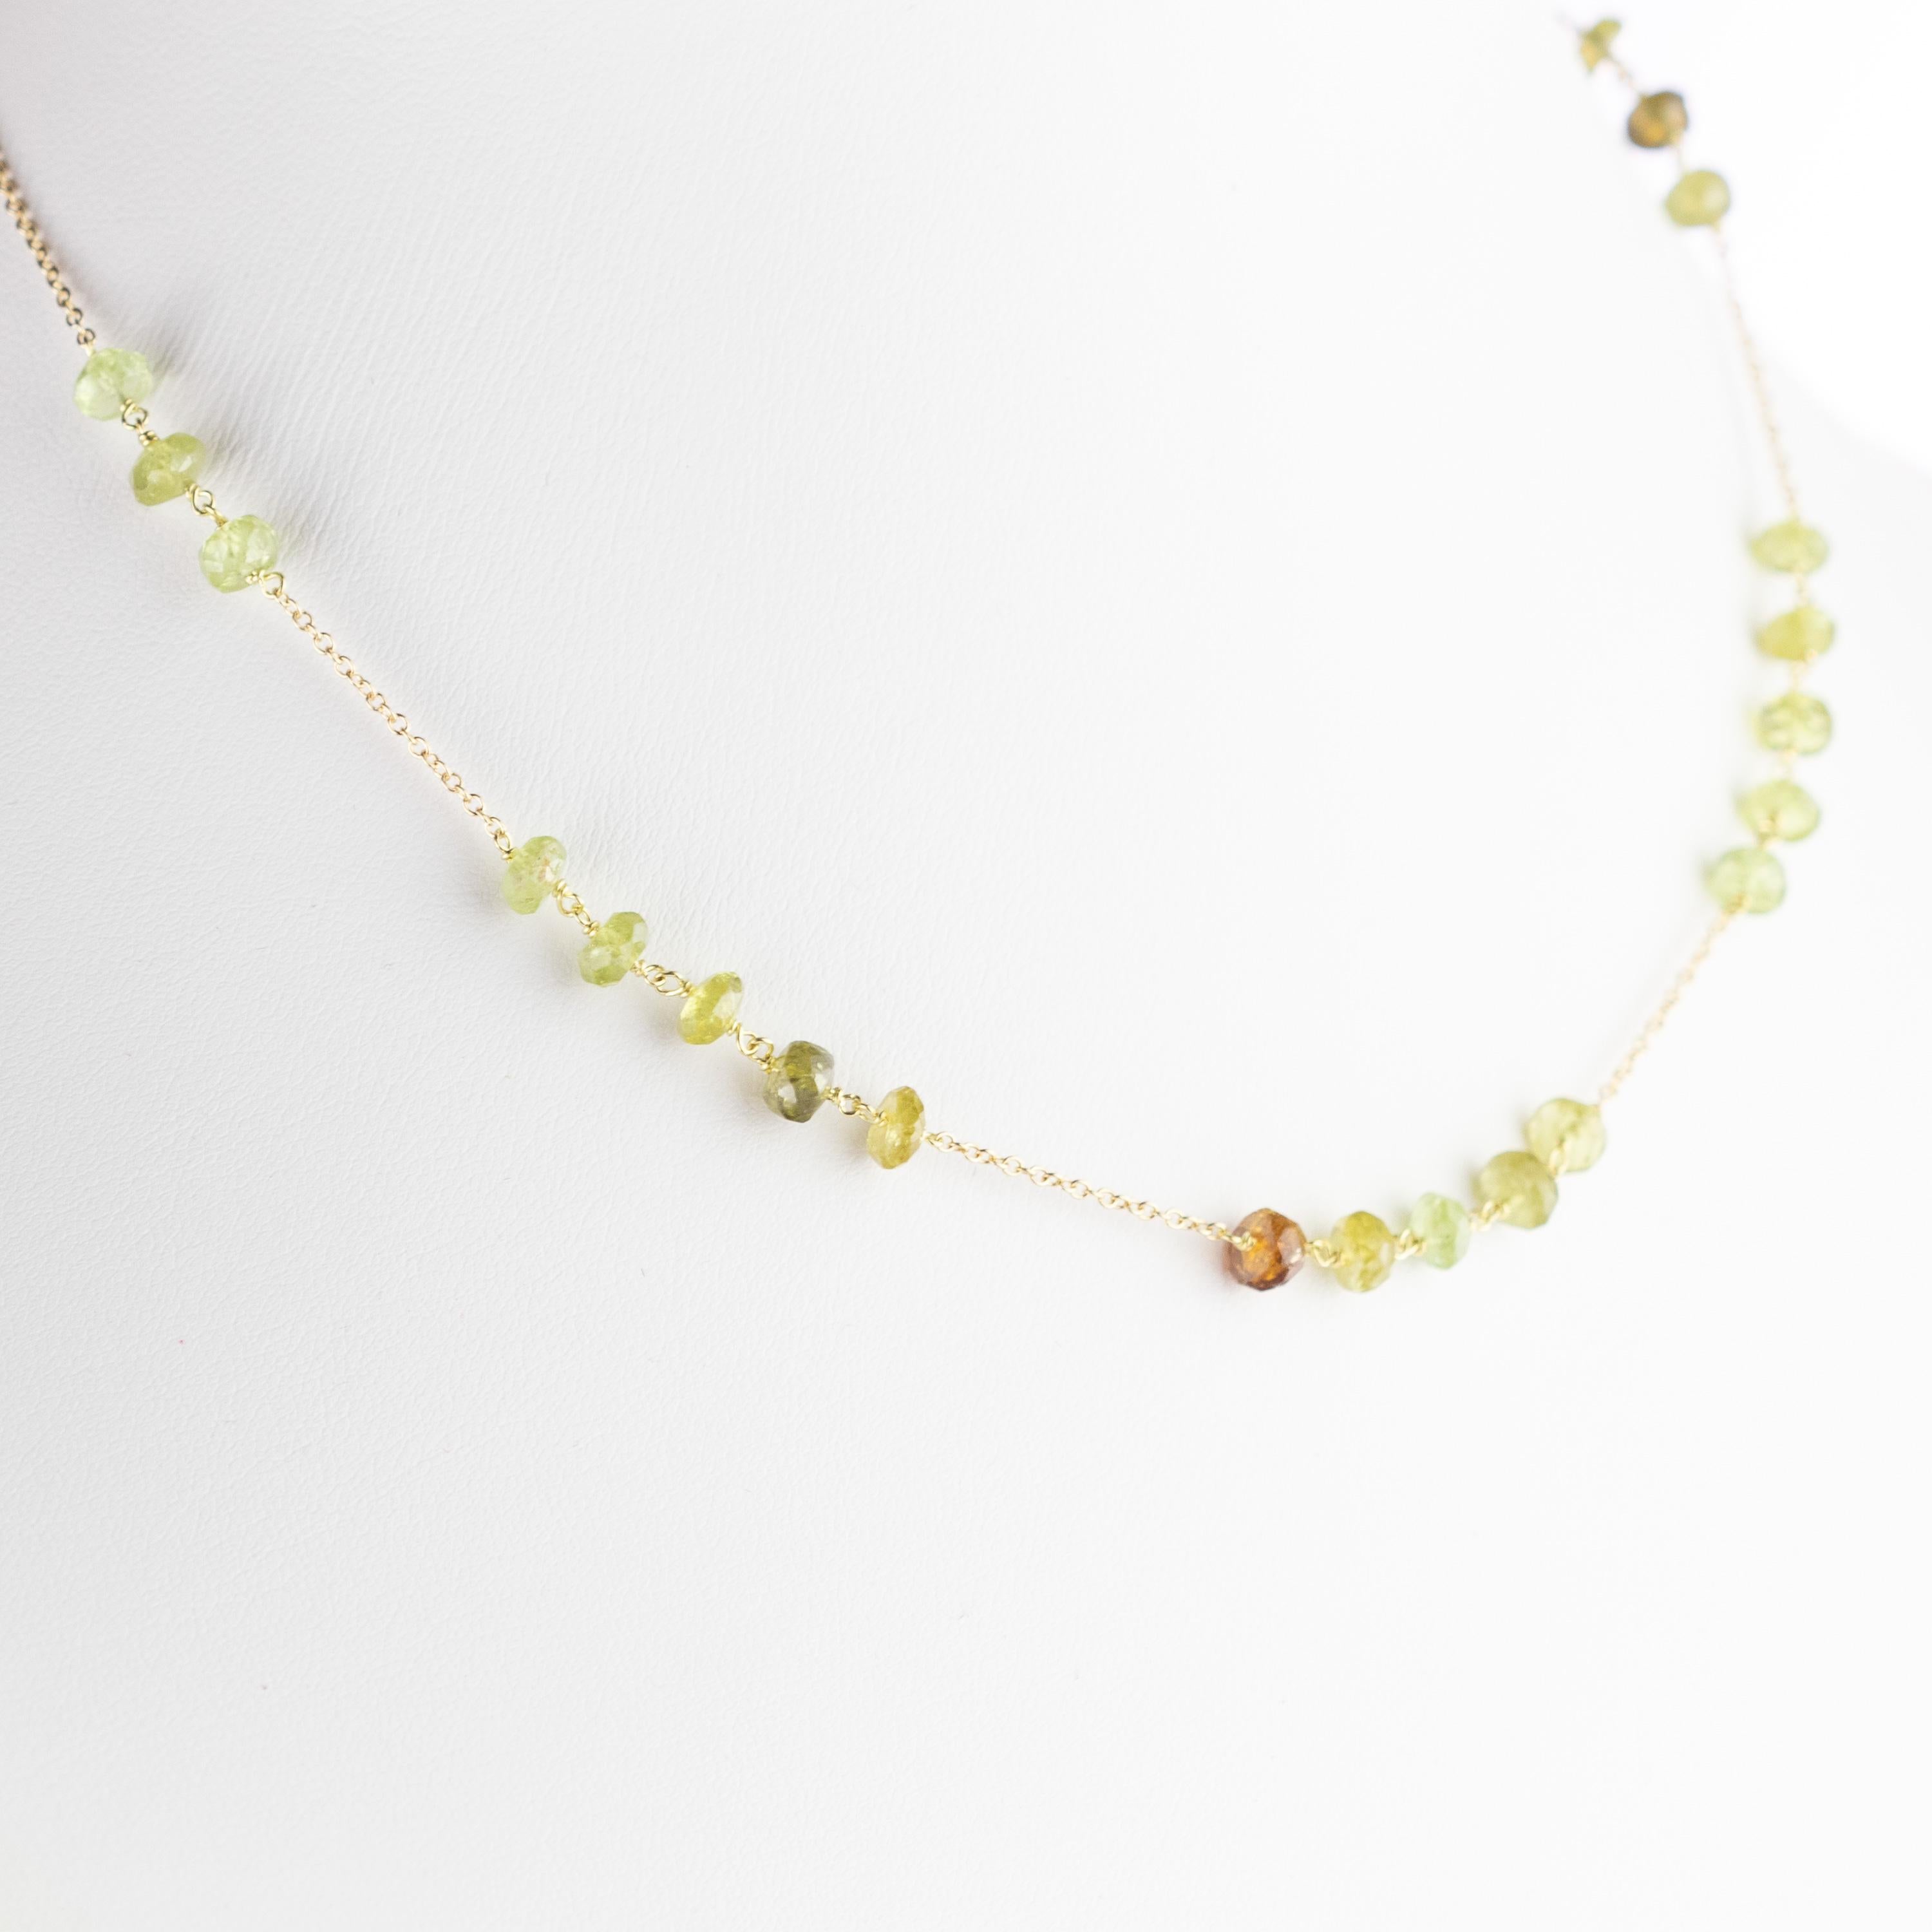 Marvellous necklace starring natural green tourmaline rondelles gems, for a bright charm of uniqueness. Luminous jewel with natural precious jewellery on elegant Gold Plate setting.

Green represents abundance, renewal, growth and nature. It is a